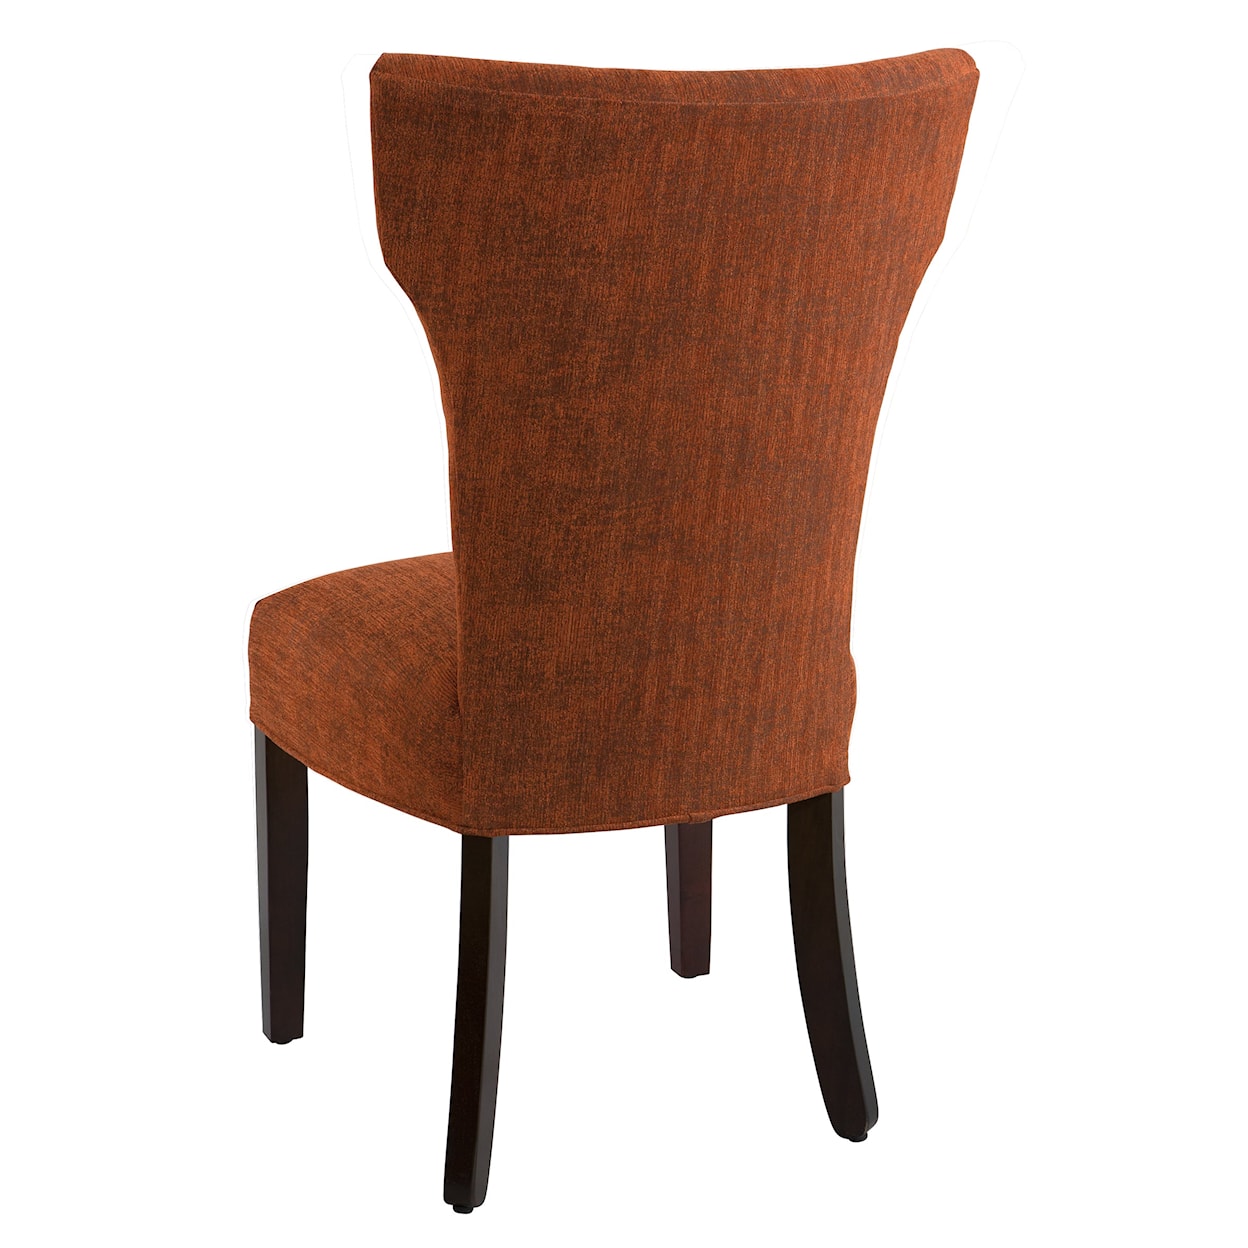 Hekman Upholstery Brianna Dining Chair